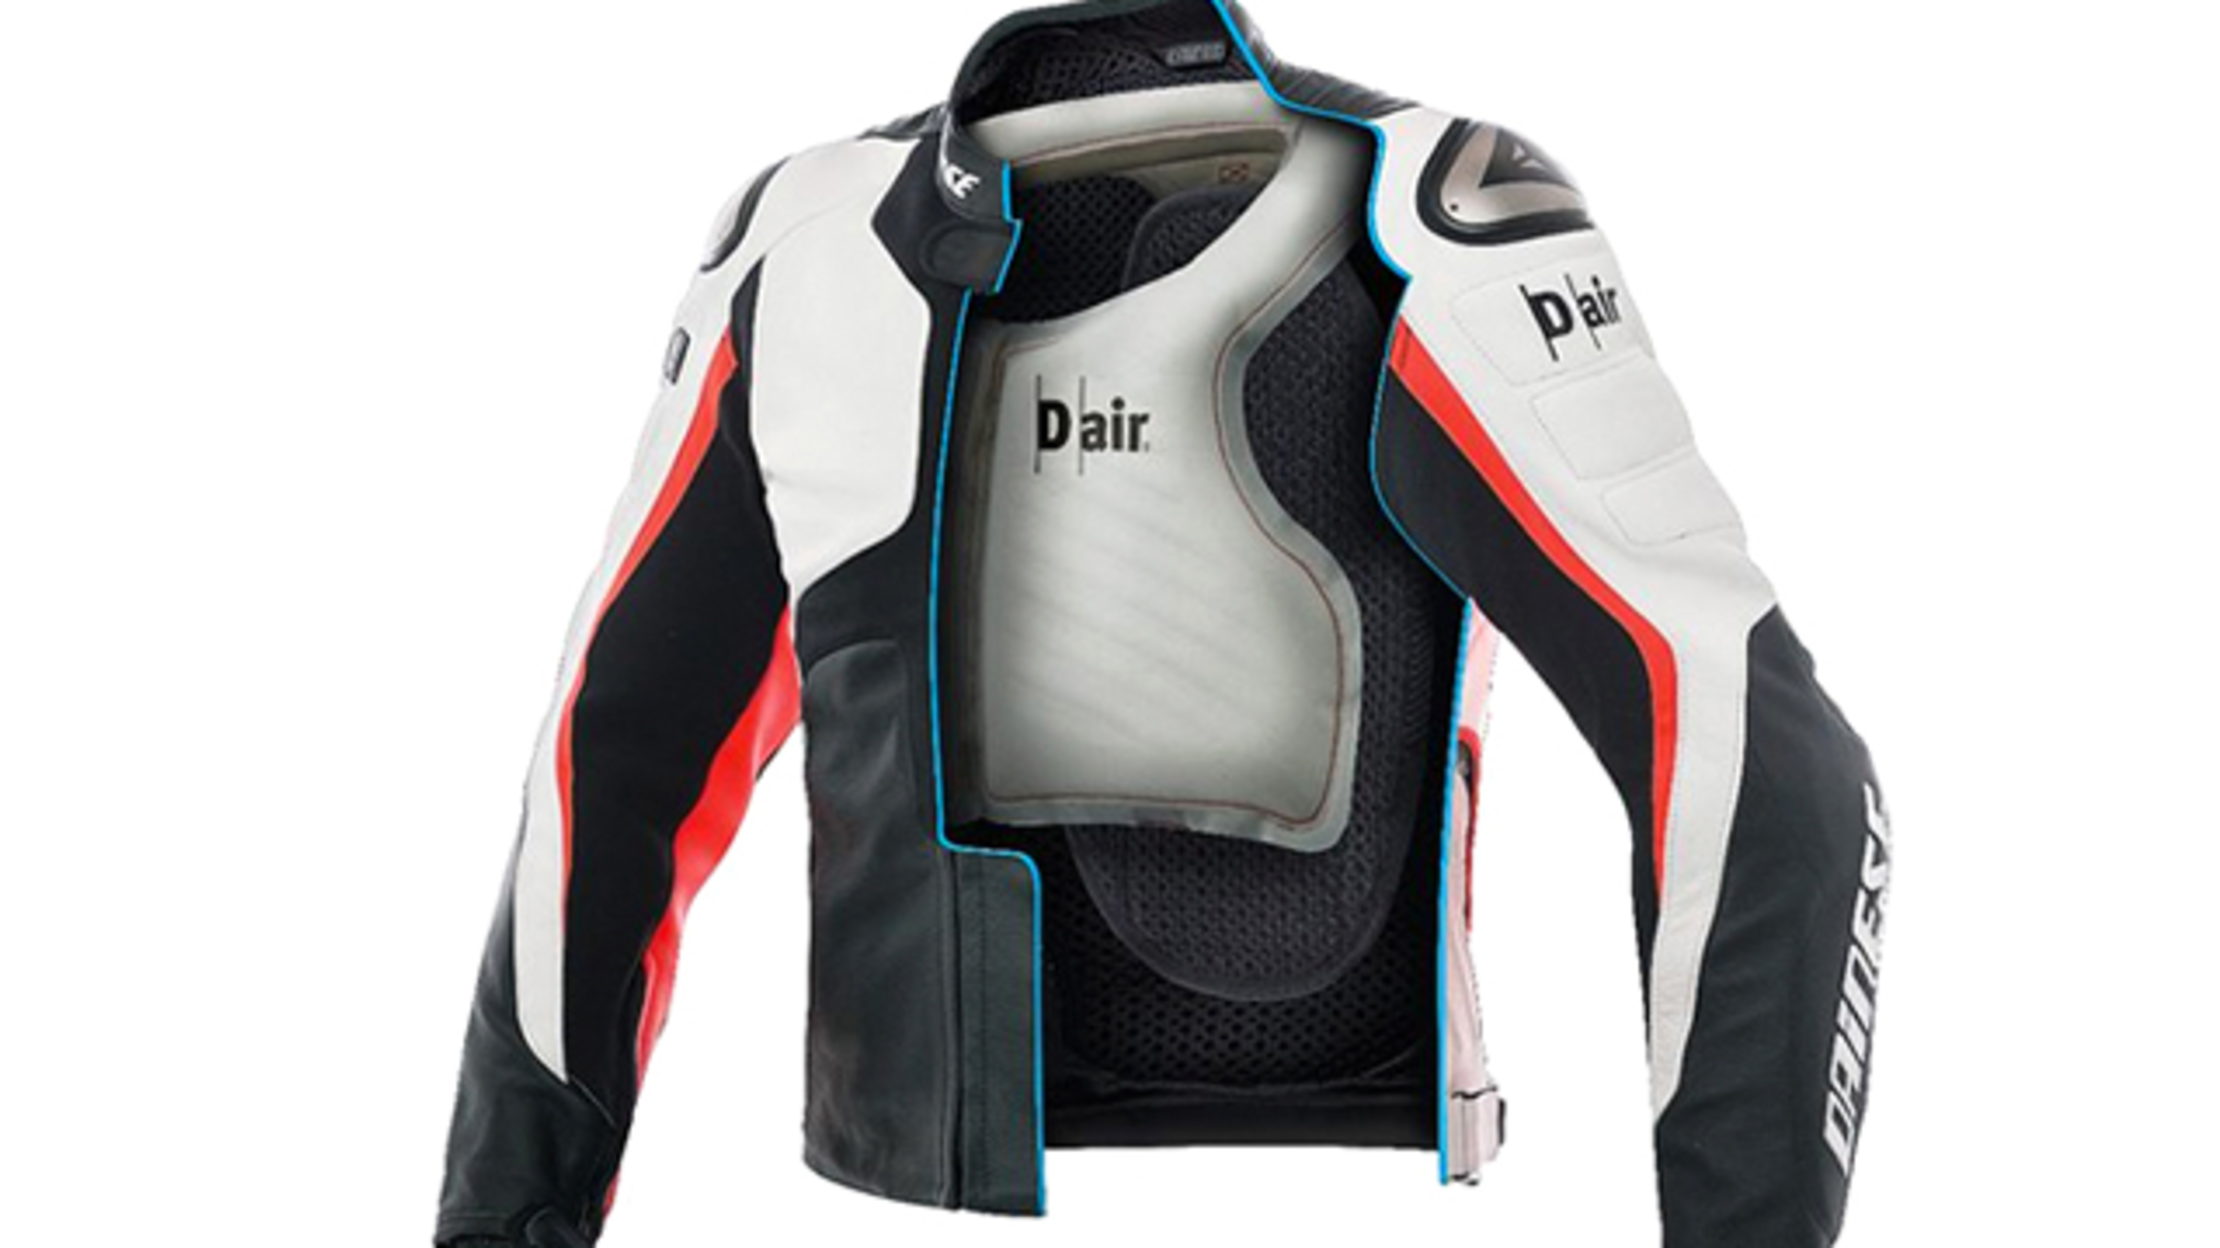 Airbag Jacket for Motorcyclists Knows When to Deploy | Mental Floss